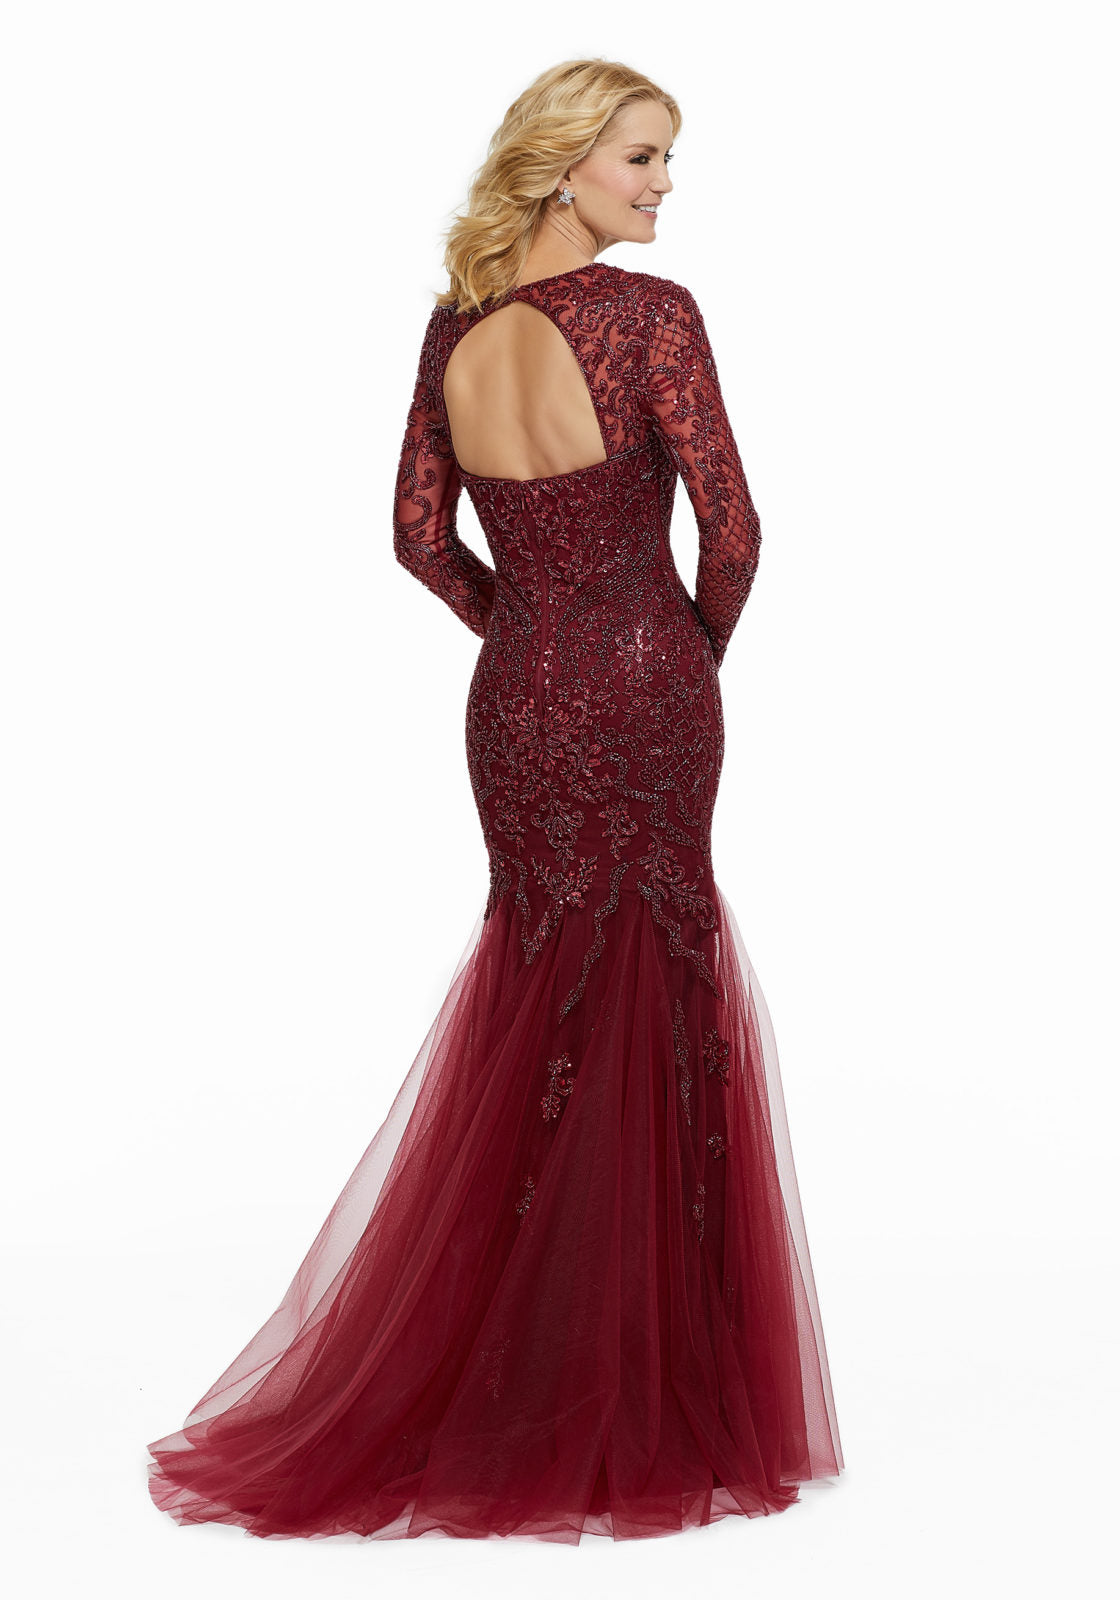 Tulle evening gown featuring allover beading with long sleeves and sweetheart neckline. Mermaid silhouette. **Picture not available in Charcoal**  Sizes: 2-24  Available in Charcoal, Black, Wine  If we do not have your desired size or color in stock please call or email us for availability!